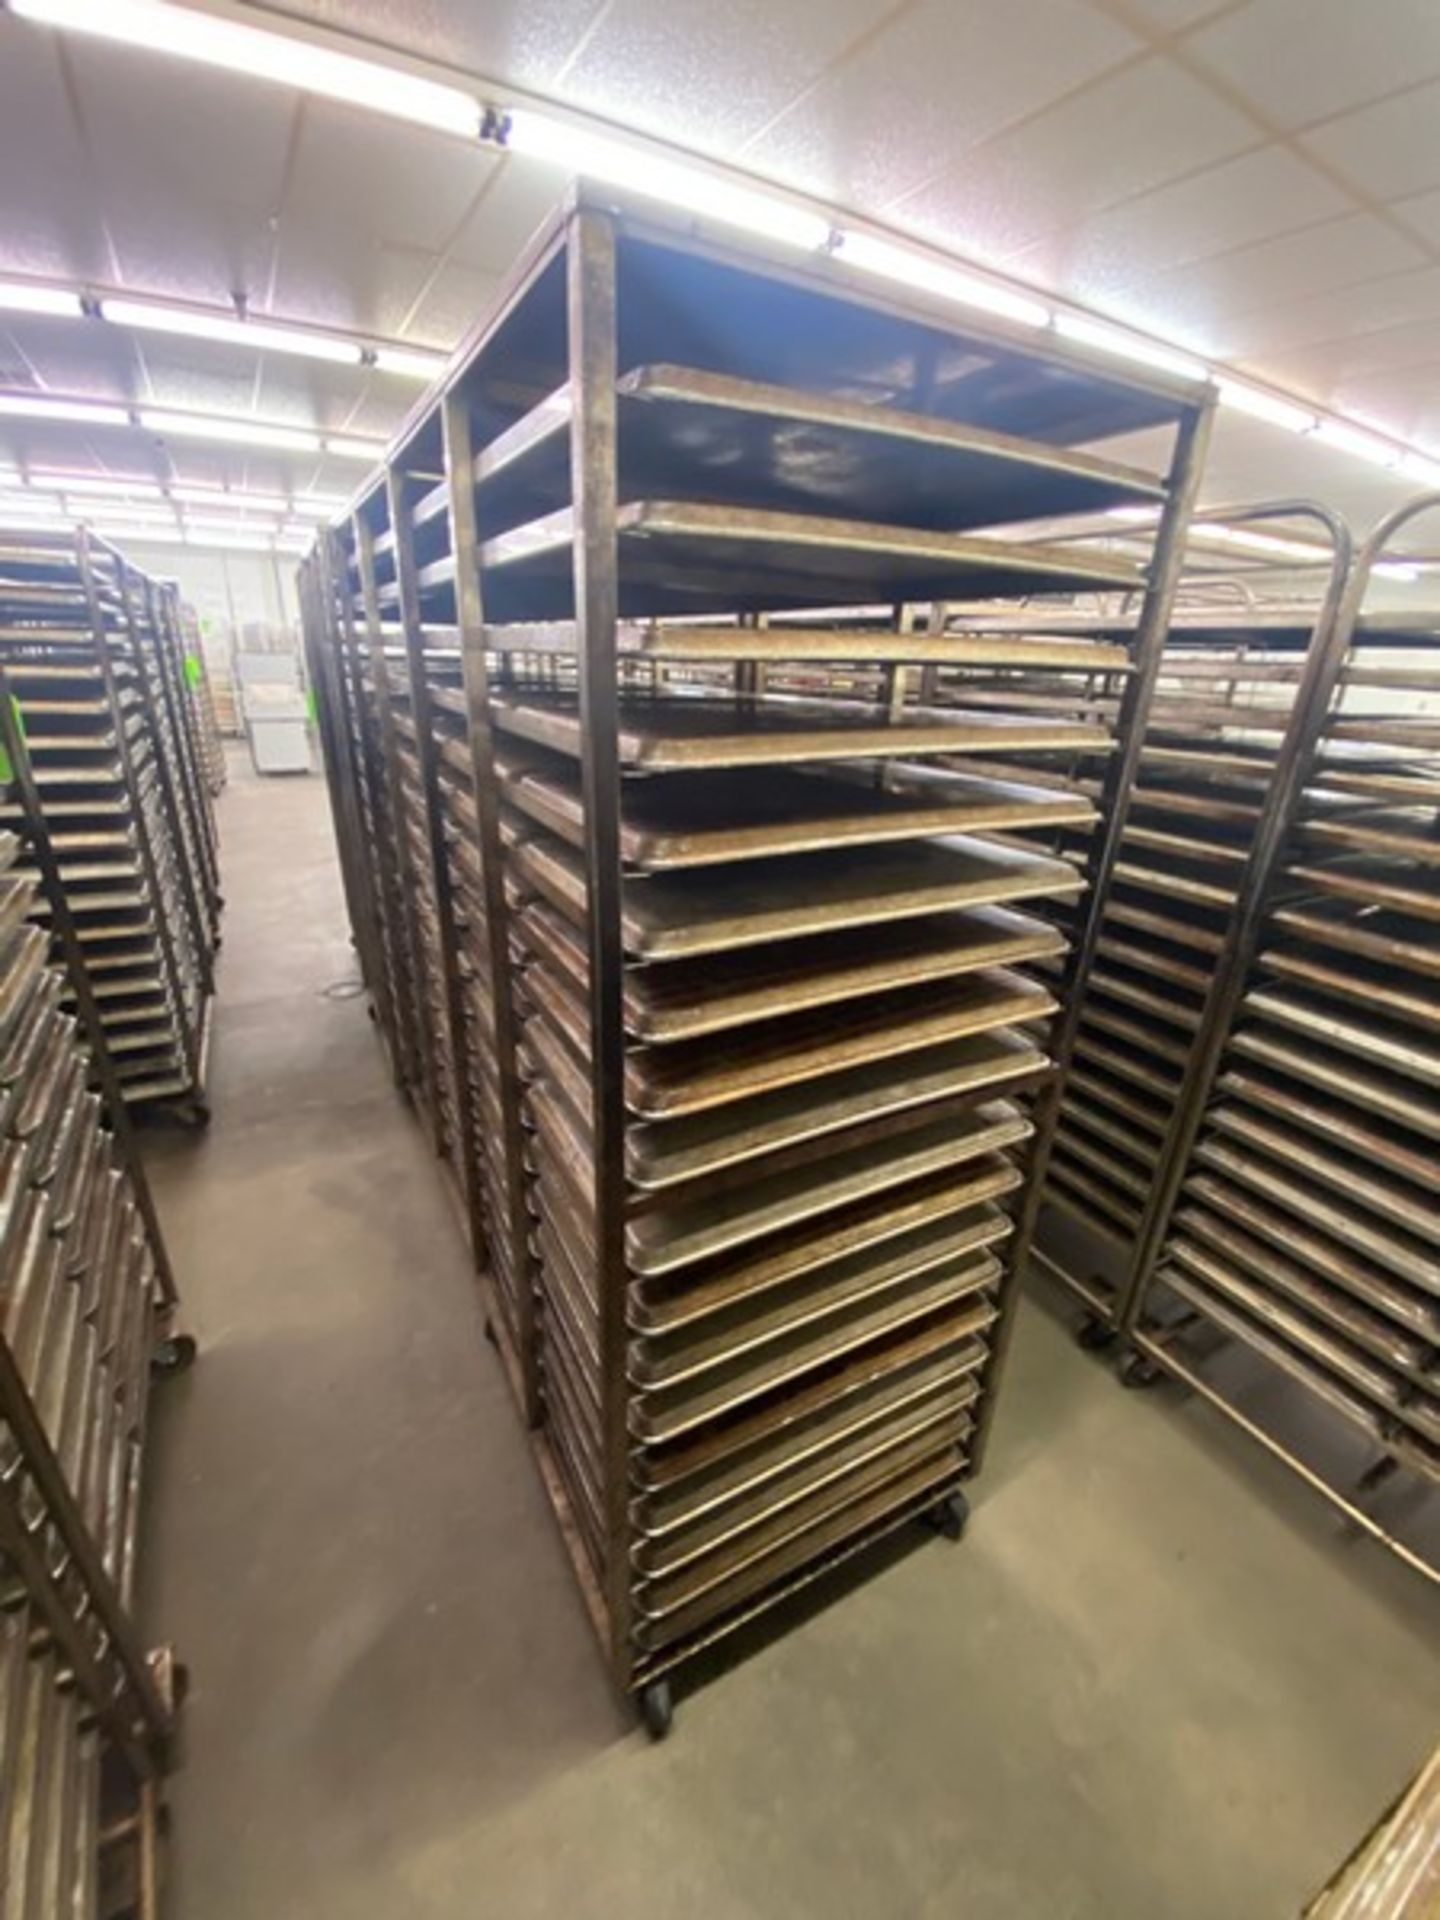 (4) PORTABLE DOUBLE SIDED BAKING PAN RACKS, MOUNTED ON CASTERS (LOCATED IN HERMITAGE, PA) - Image 3 of 3